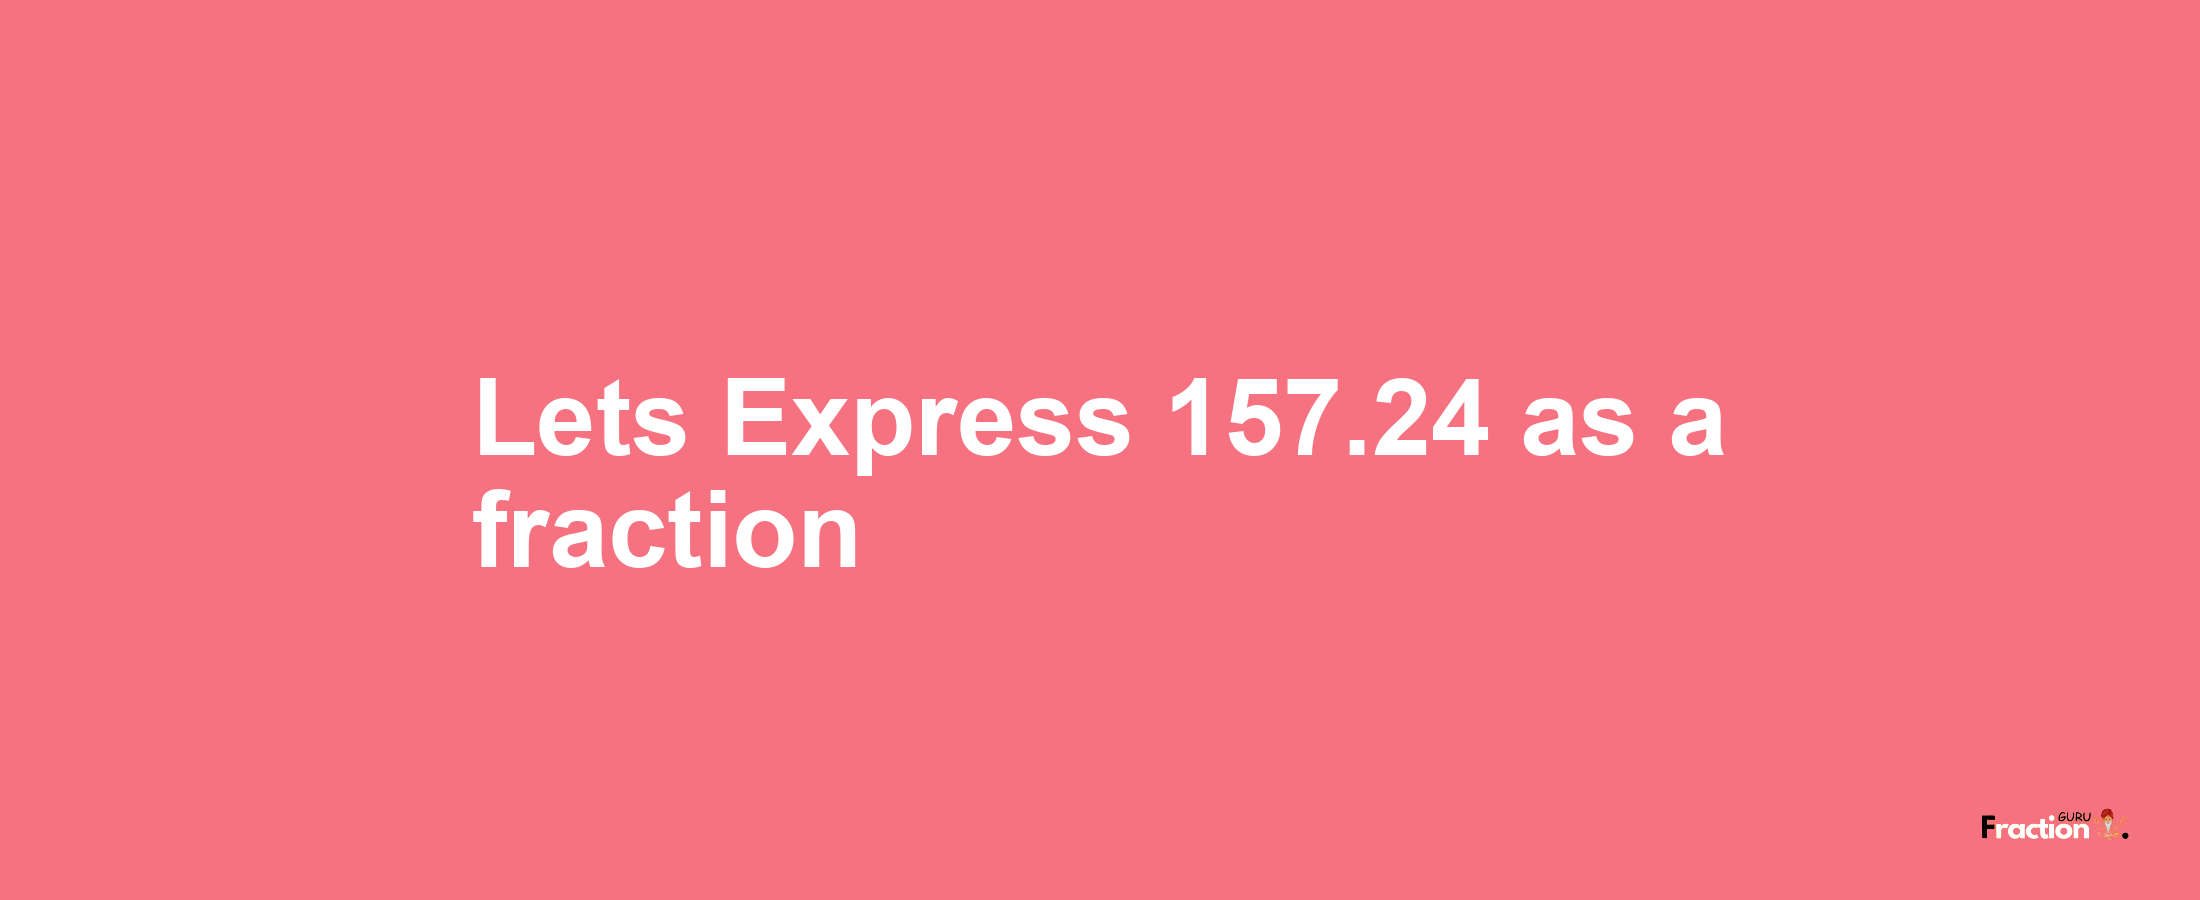 Lets Express 157.24 as afraction